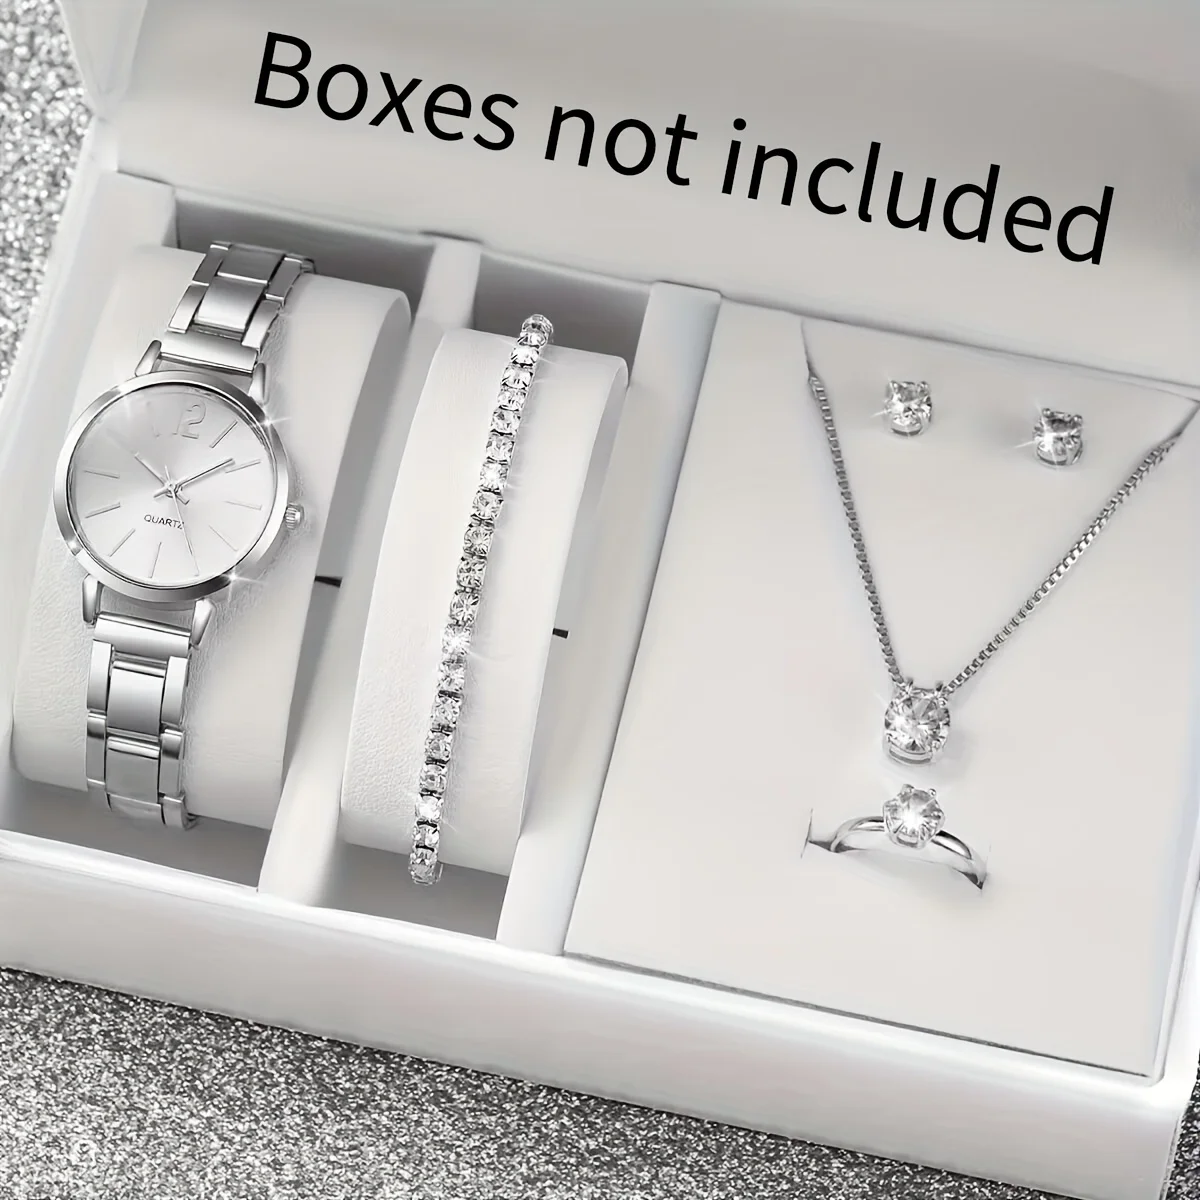 

Elegant 6-Piece Watch & Jewelry Set – Stainless Steel Quartz Timepiece with Sparkling Accessories – Perfect Gift for Her